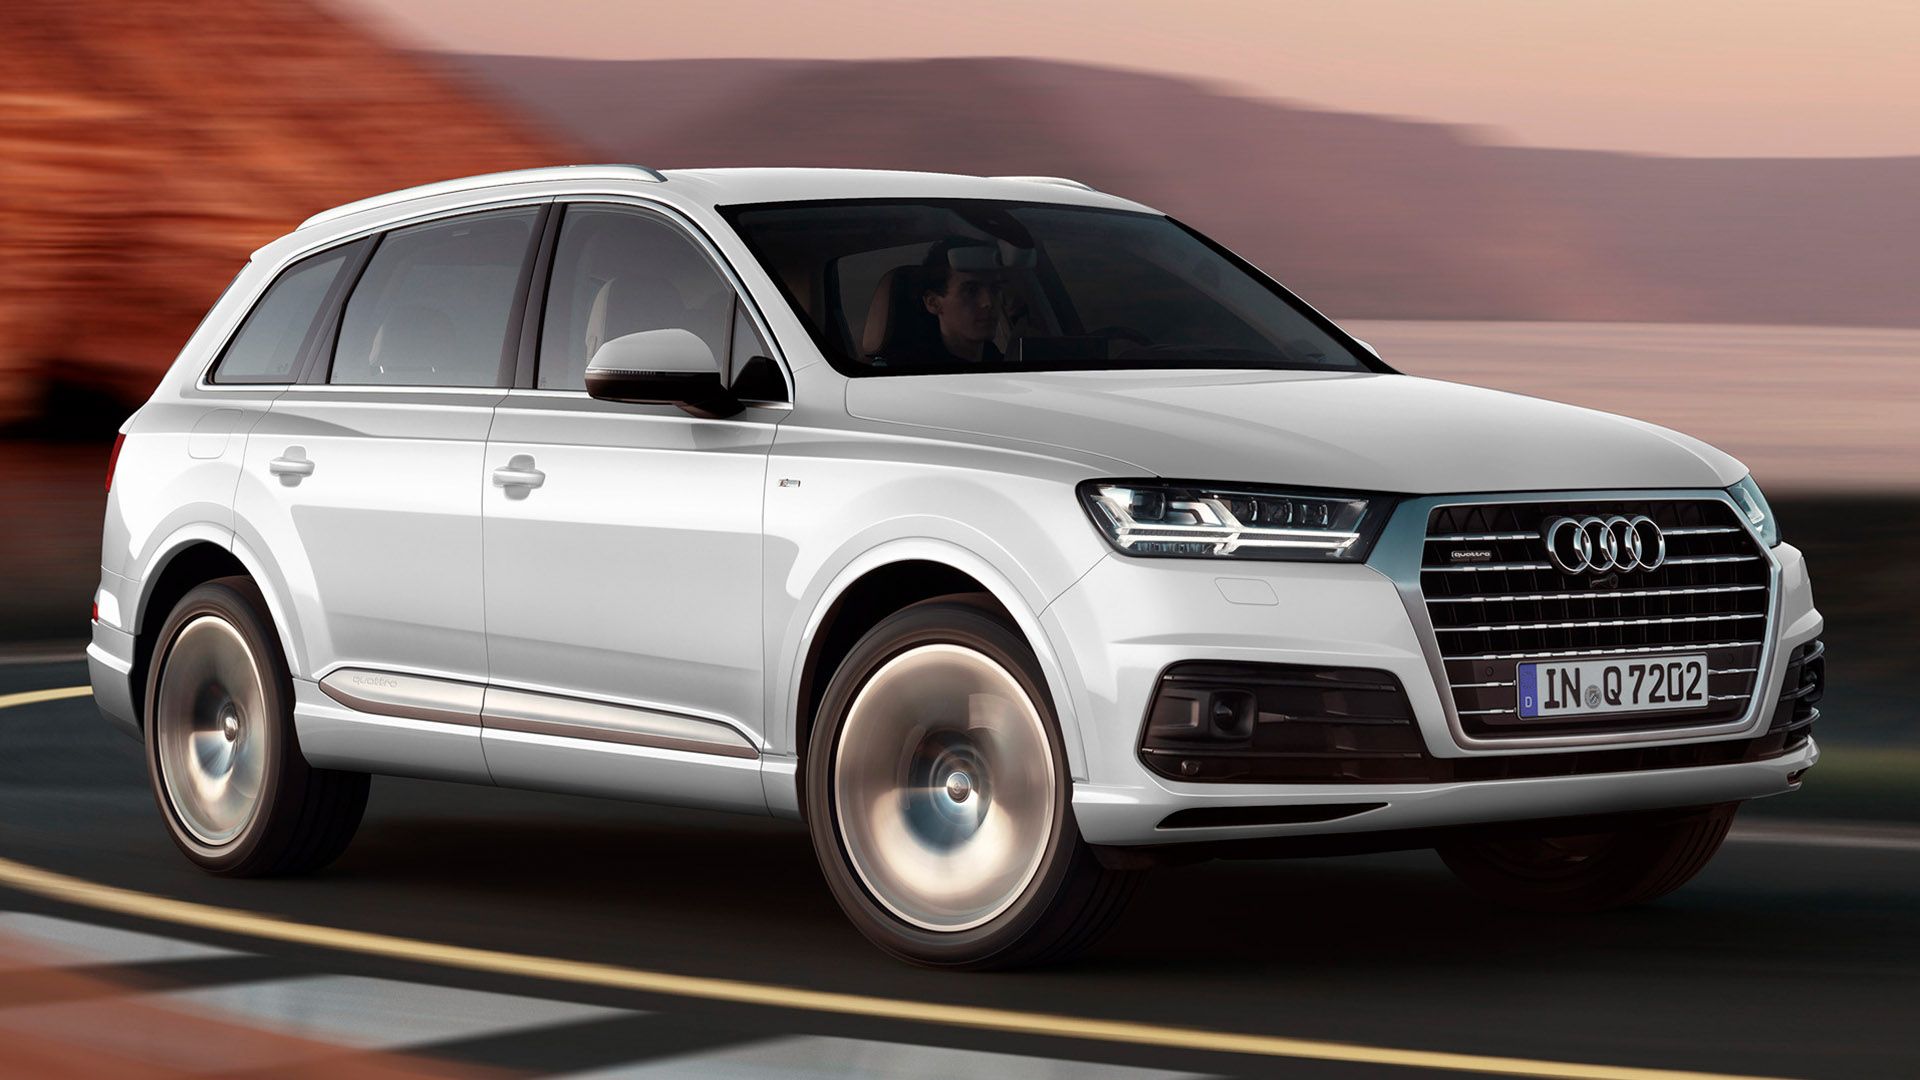 White Audi Q7 on the carriageway in the desert